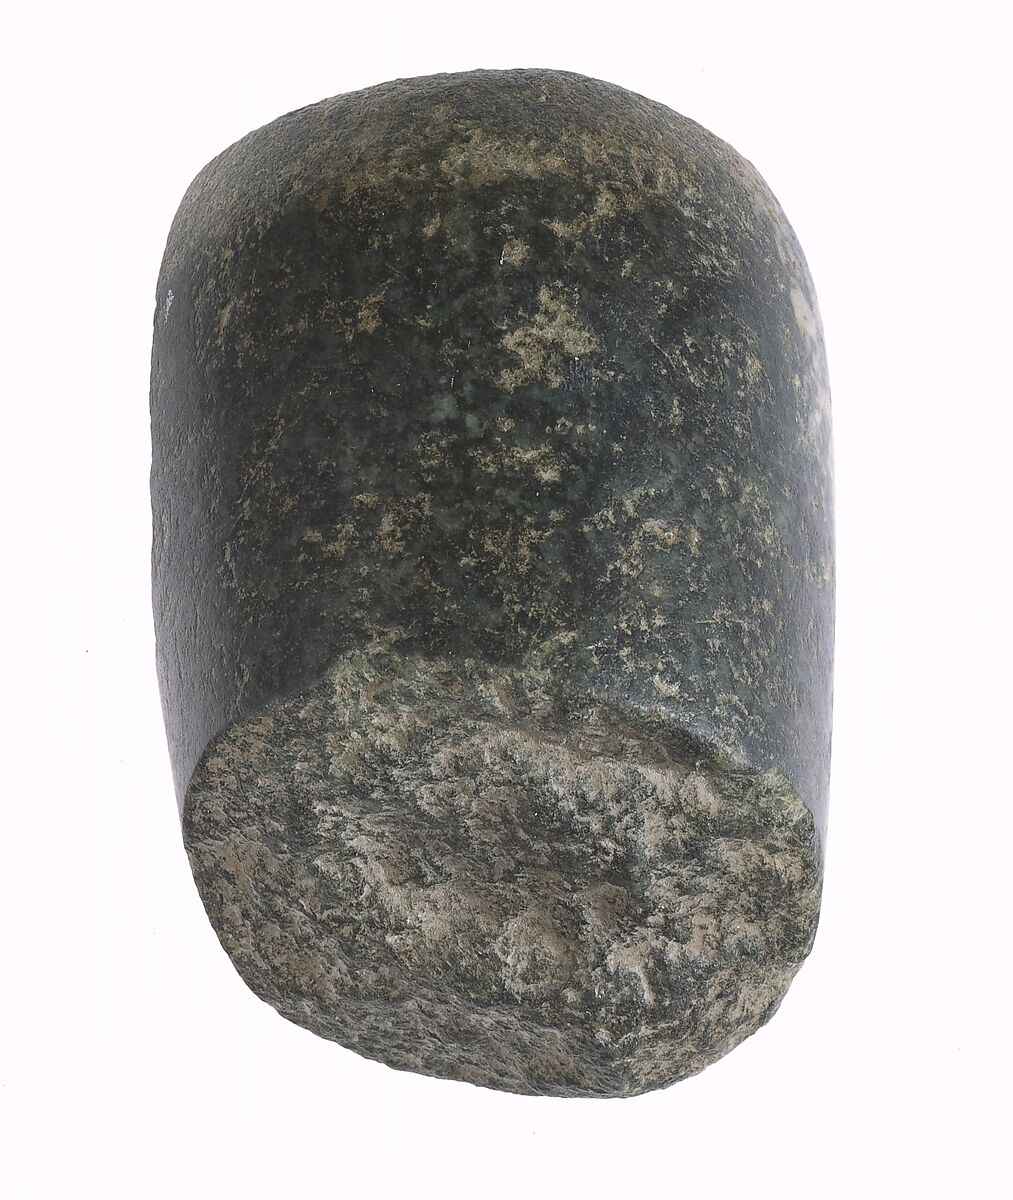 Pestle made from inscribed object, Diorite 